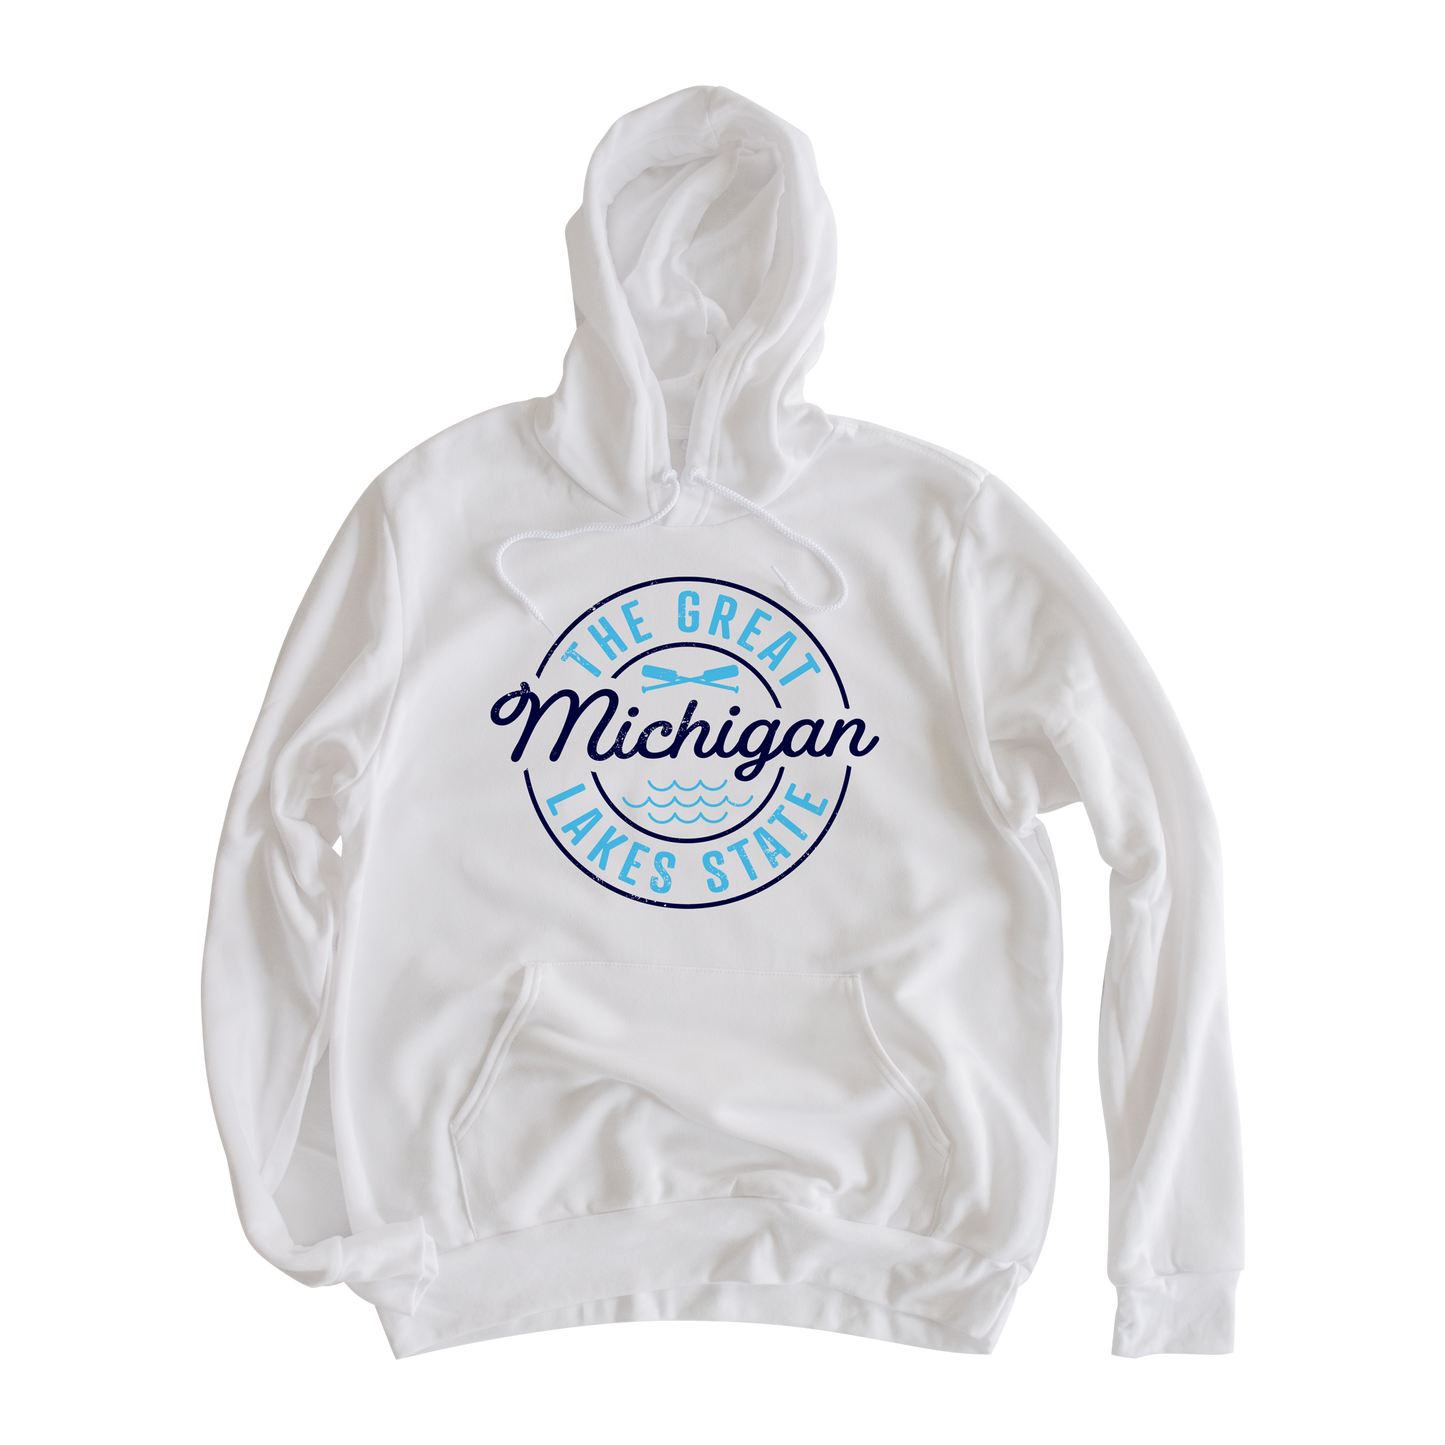 Michigan, The Great Lakes State Hooded Sweatshirt